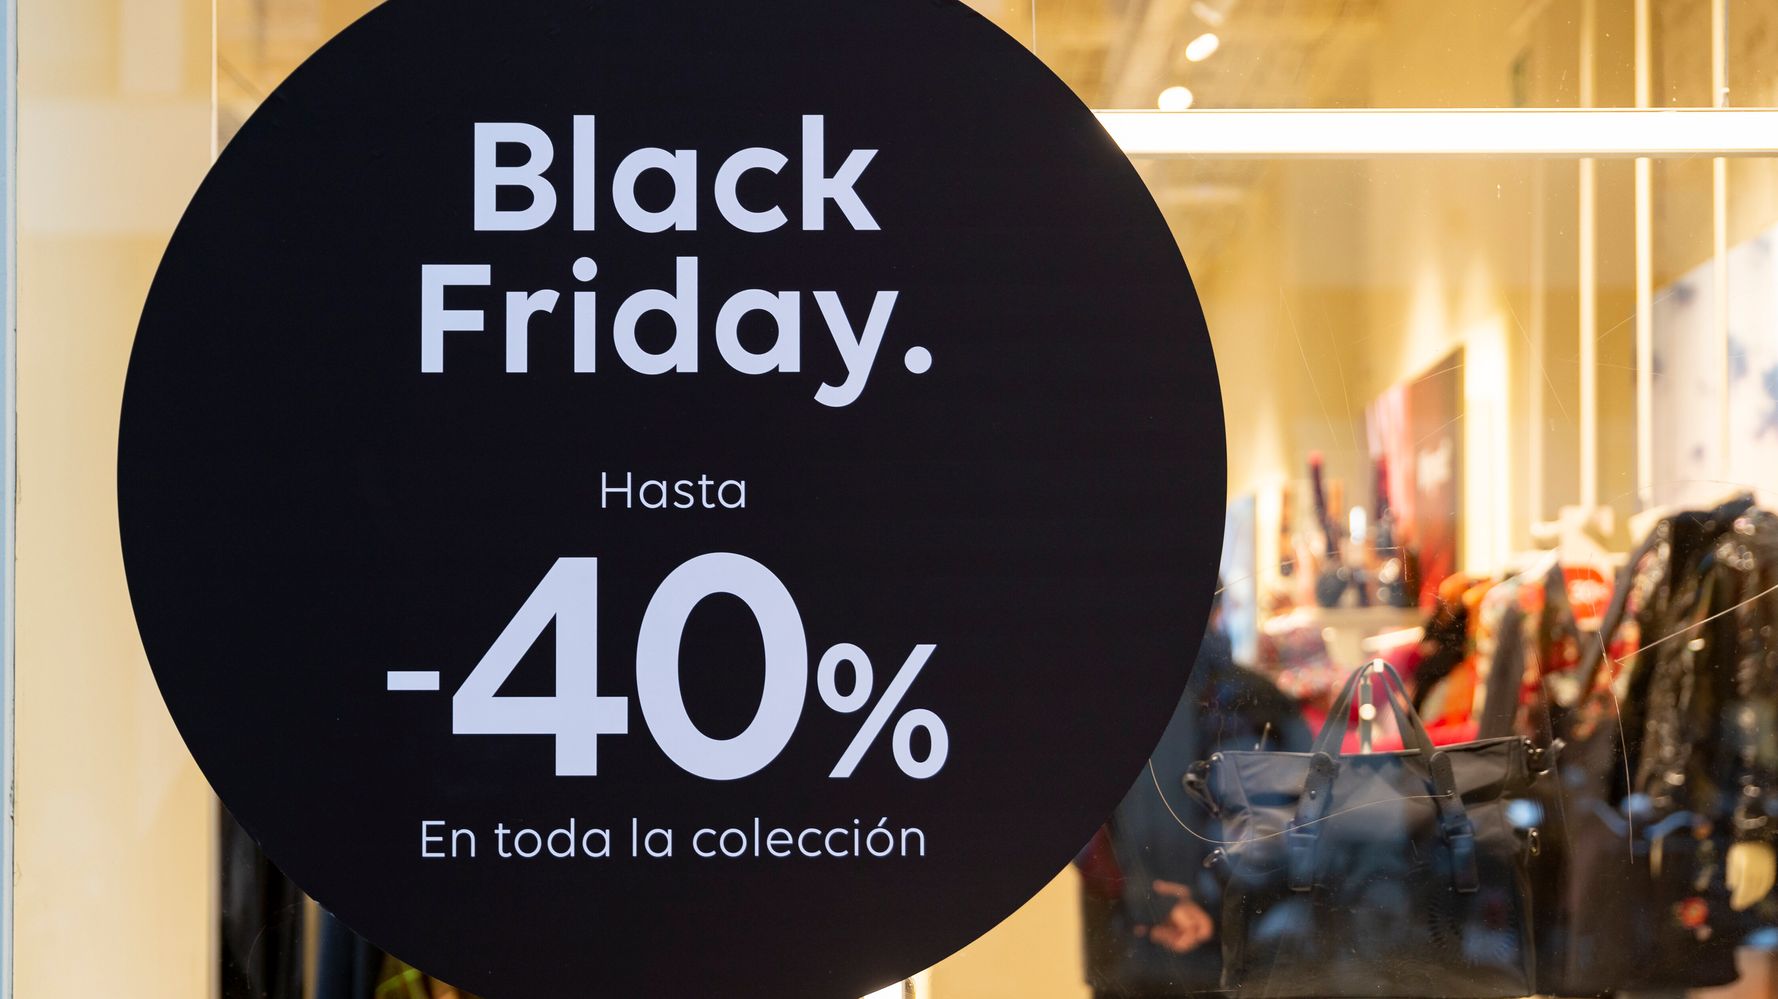 How Black Friday Got Its Name: The Real Story